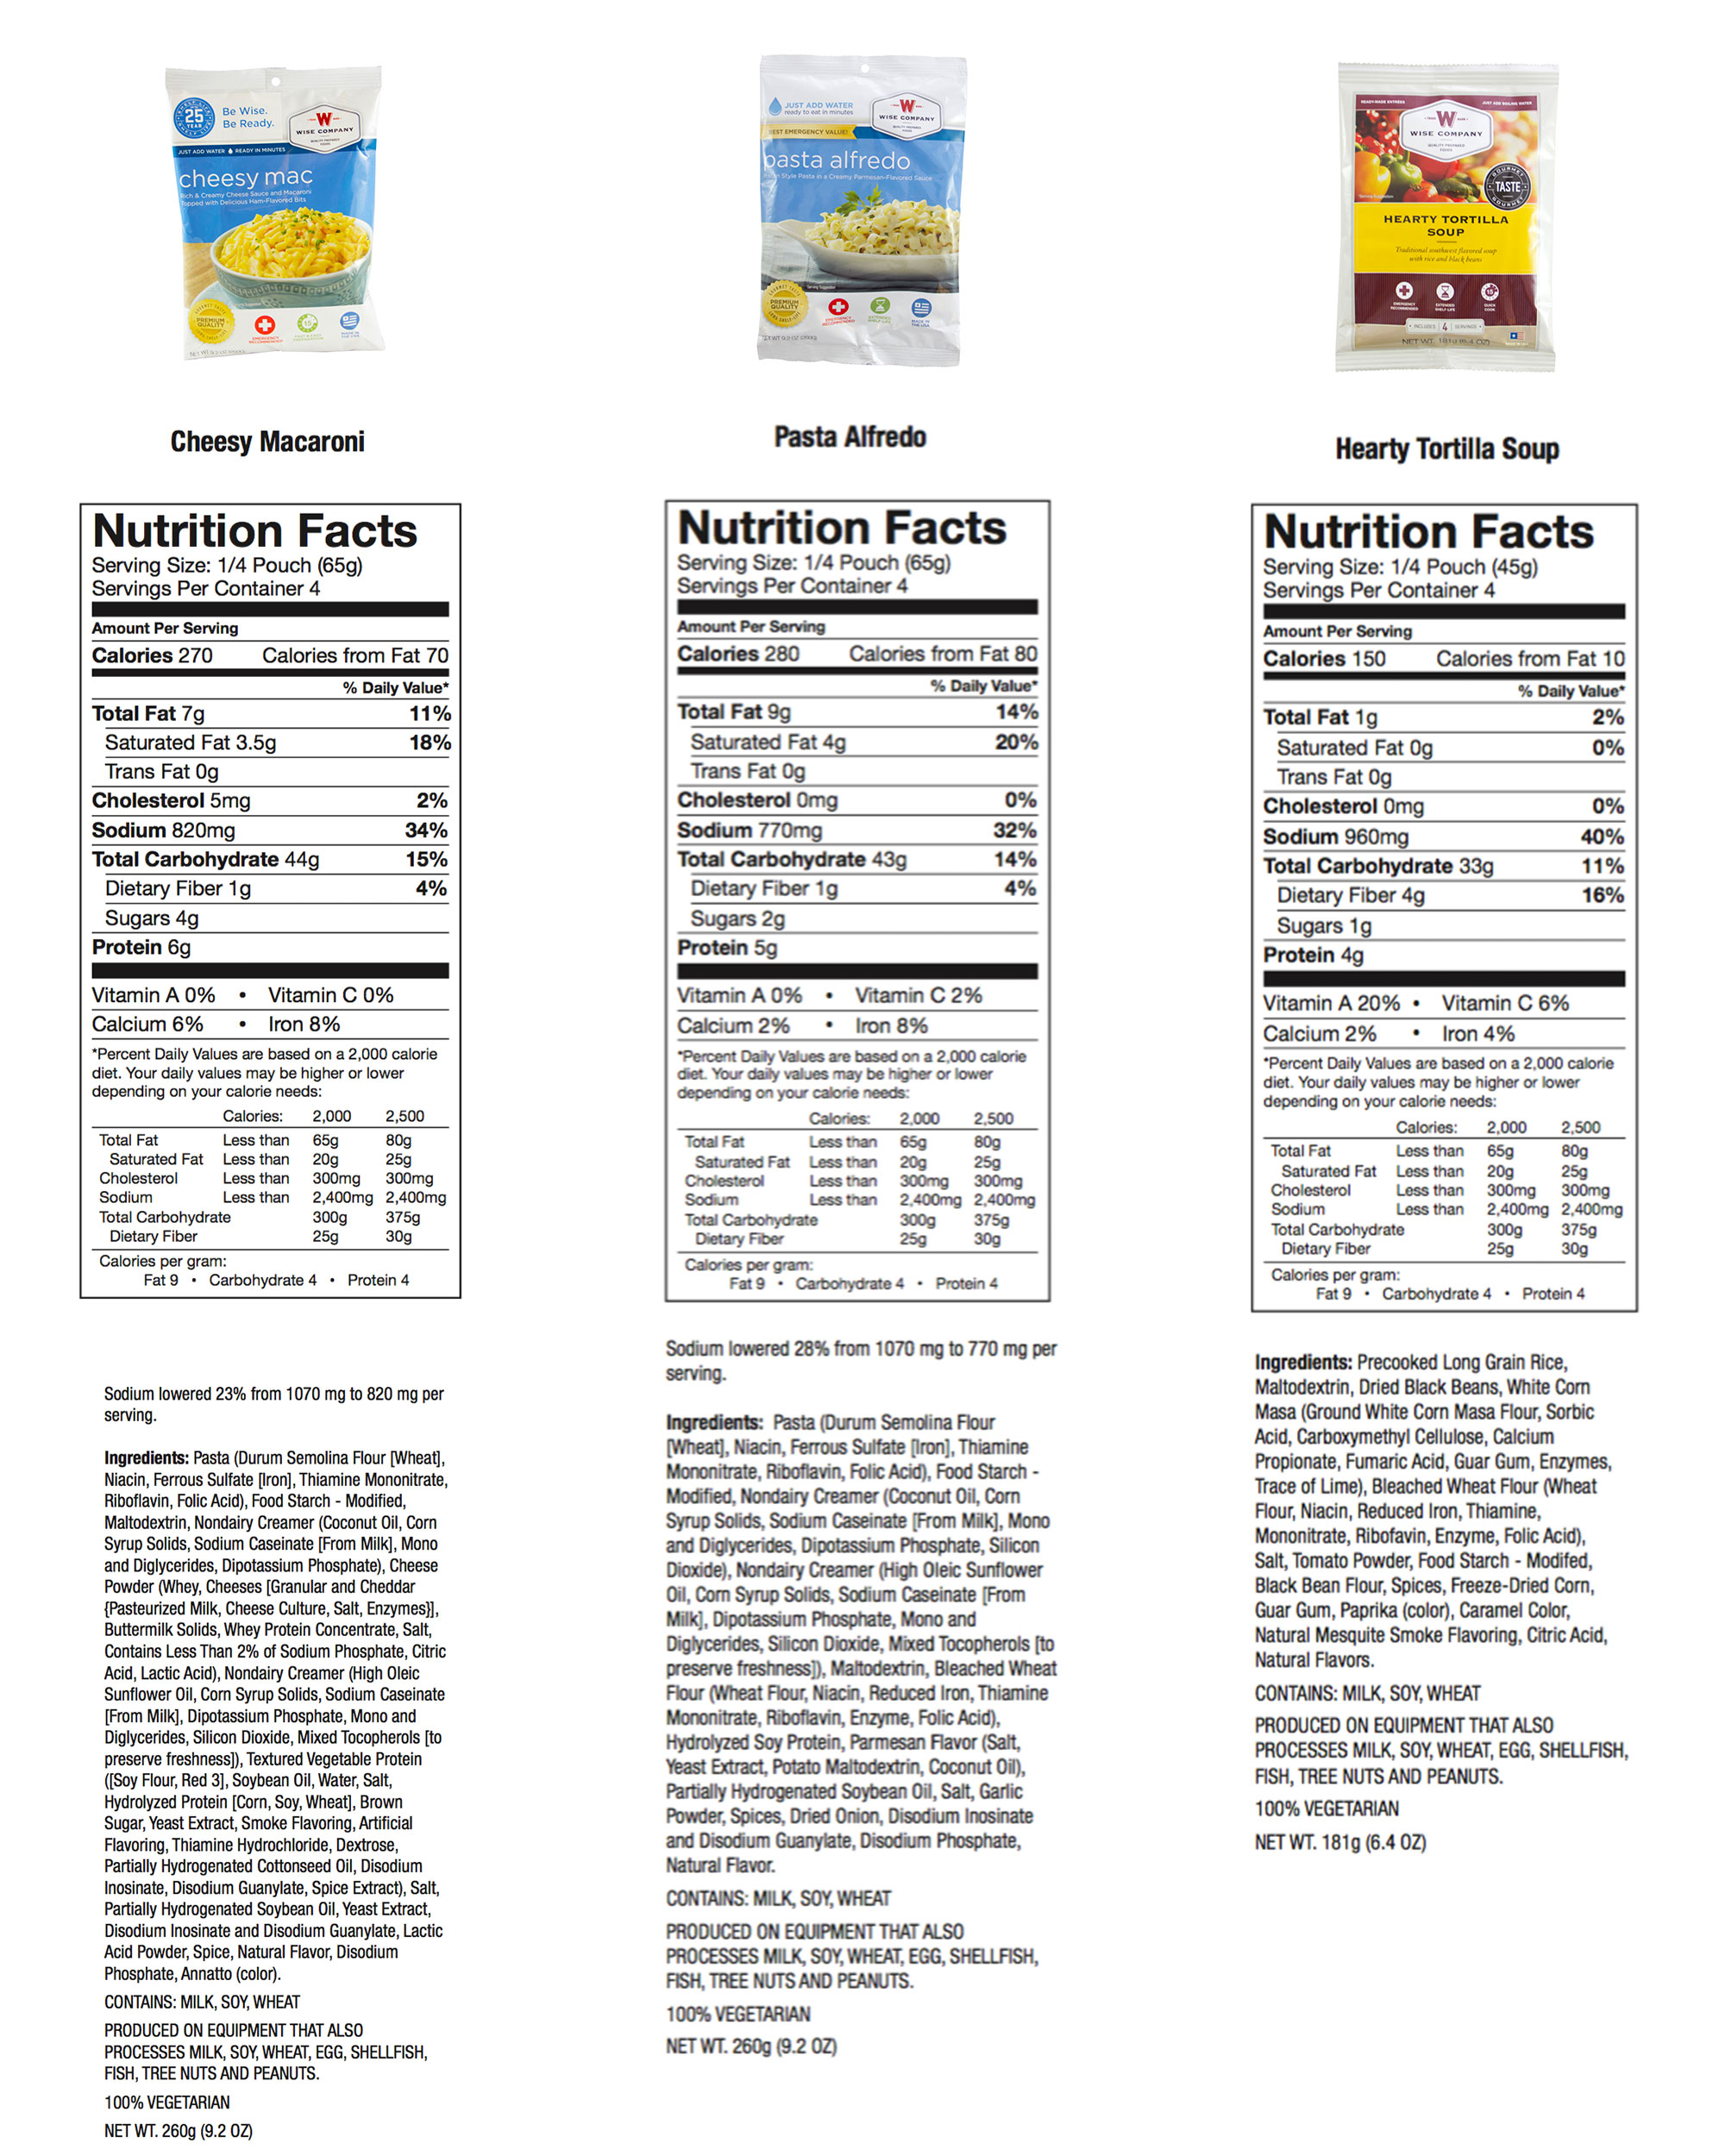 nutrition_2-2.jpg.pagespeed.ce.S86XH7NFsi